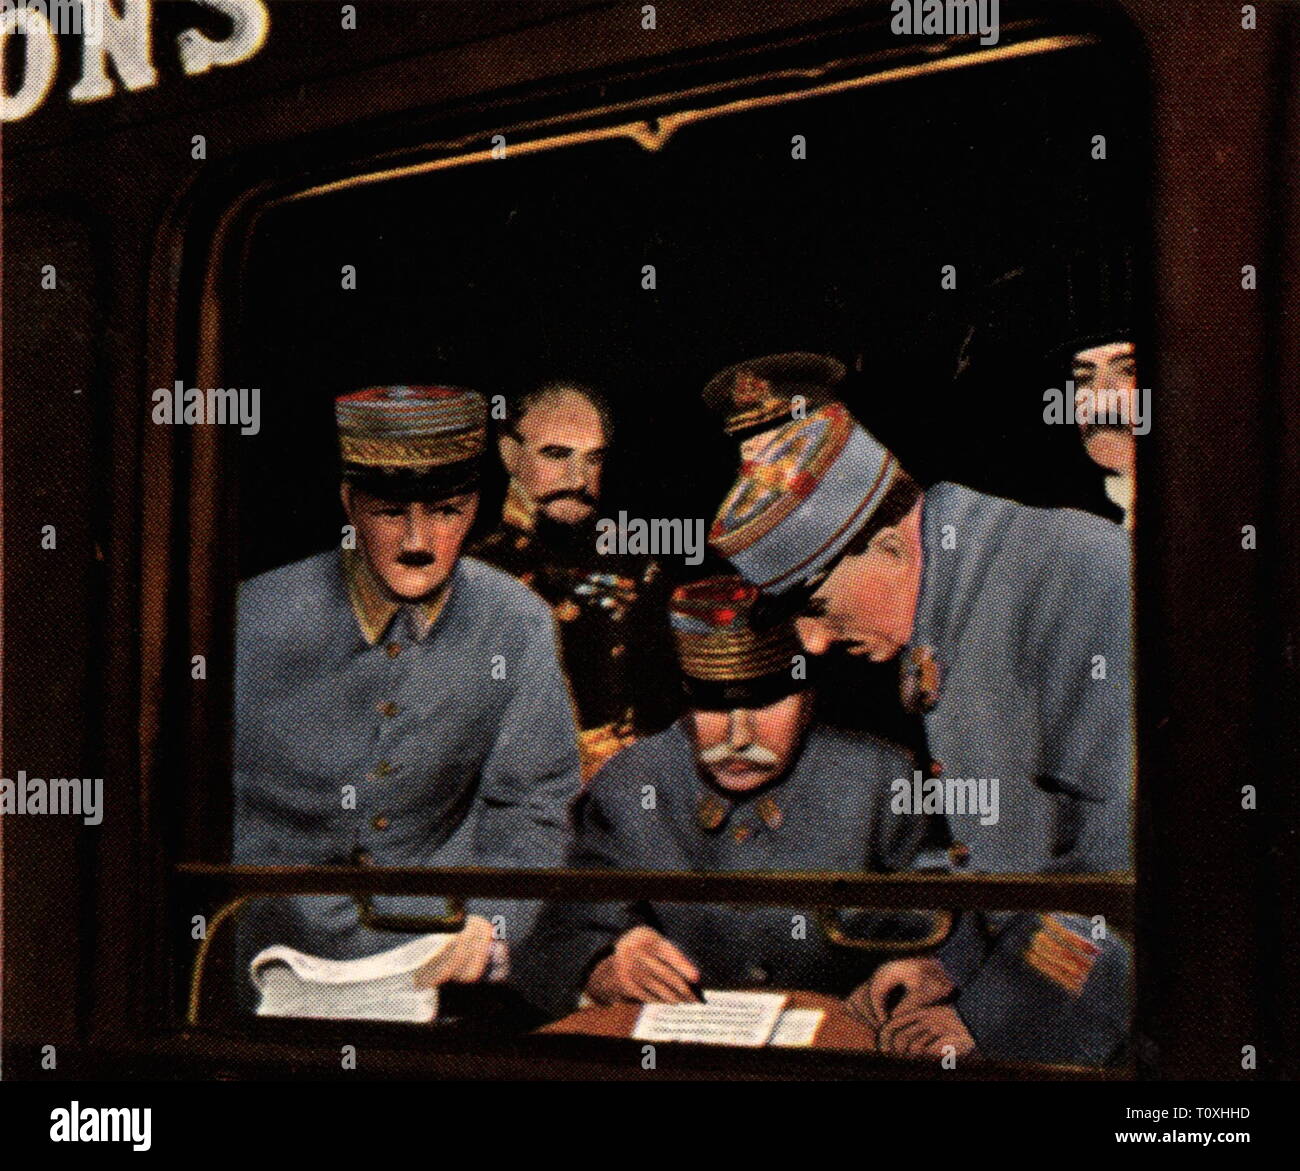 First World War / WWI, Western front, Armistice of Compiègne, French marshal Ferdinand Foch is signing the agreement, 11.11.1918, coloured photograph, cigarette card, series 'Die Nachkriegszeit', 1935, railway carriage, railway carriages, railway, railroad, railways, railroads, saloon carriage, window, windows, military, officers, officer, signing of the agreement, execution of the contract, end of the war, war's end, Compiegne, France, Germany, German Reich, Weimar Republic, people, 20th century, 1930s, world war, world wars, armistice, cease-fi, Additional-Rights-Clearance-Info-Not-Available Stock Photo